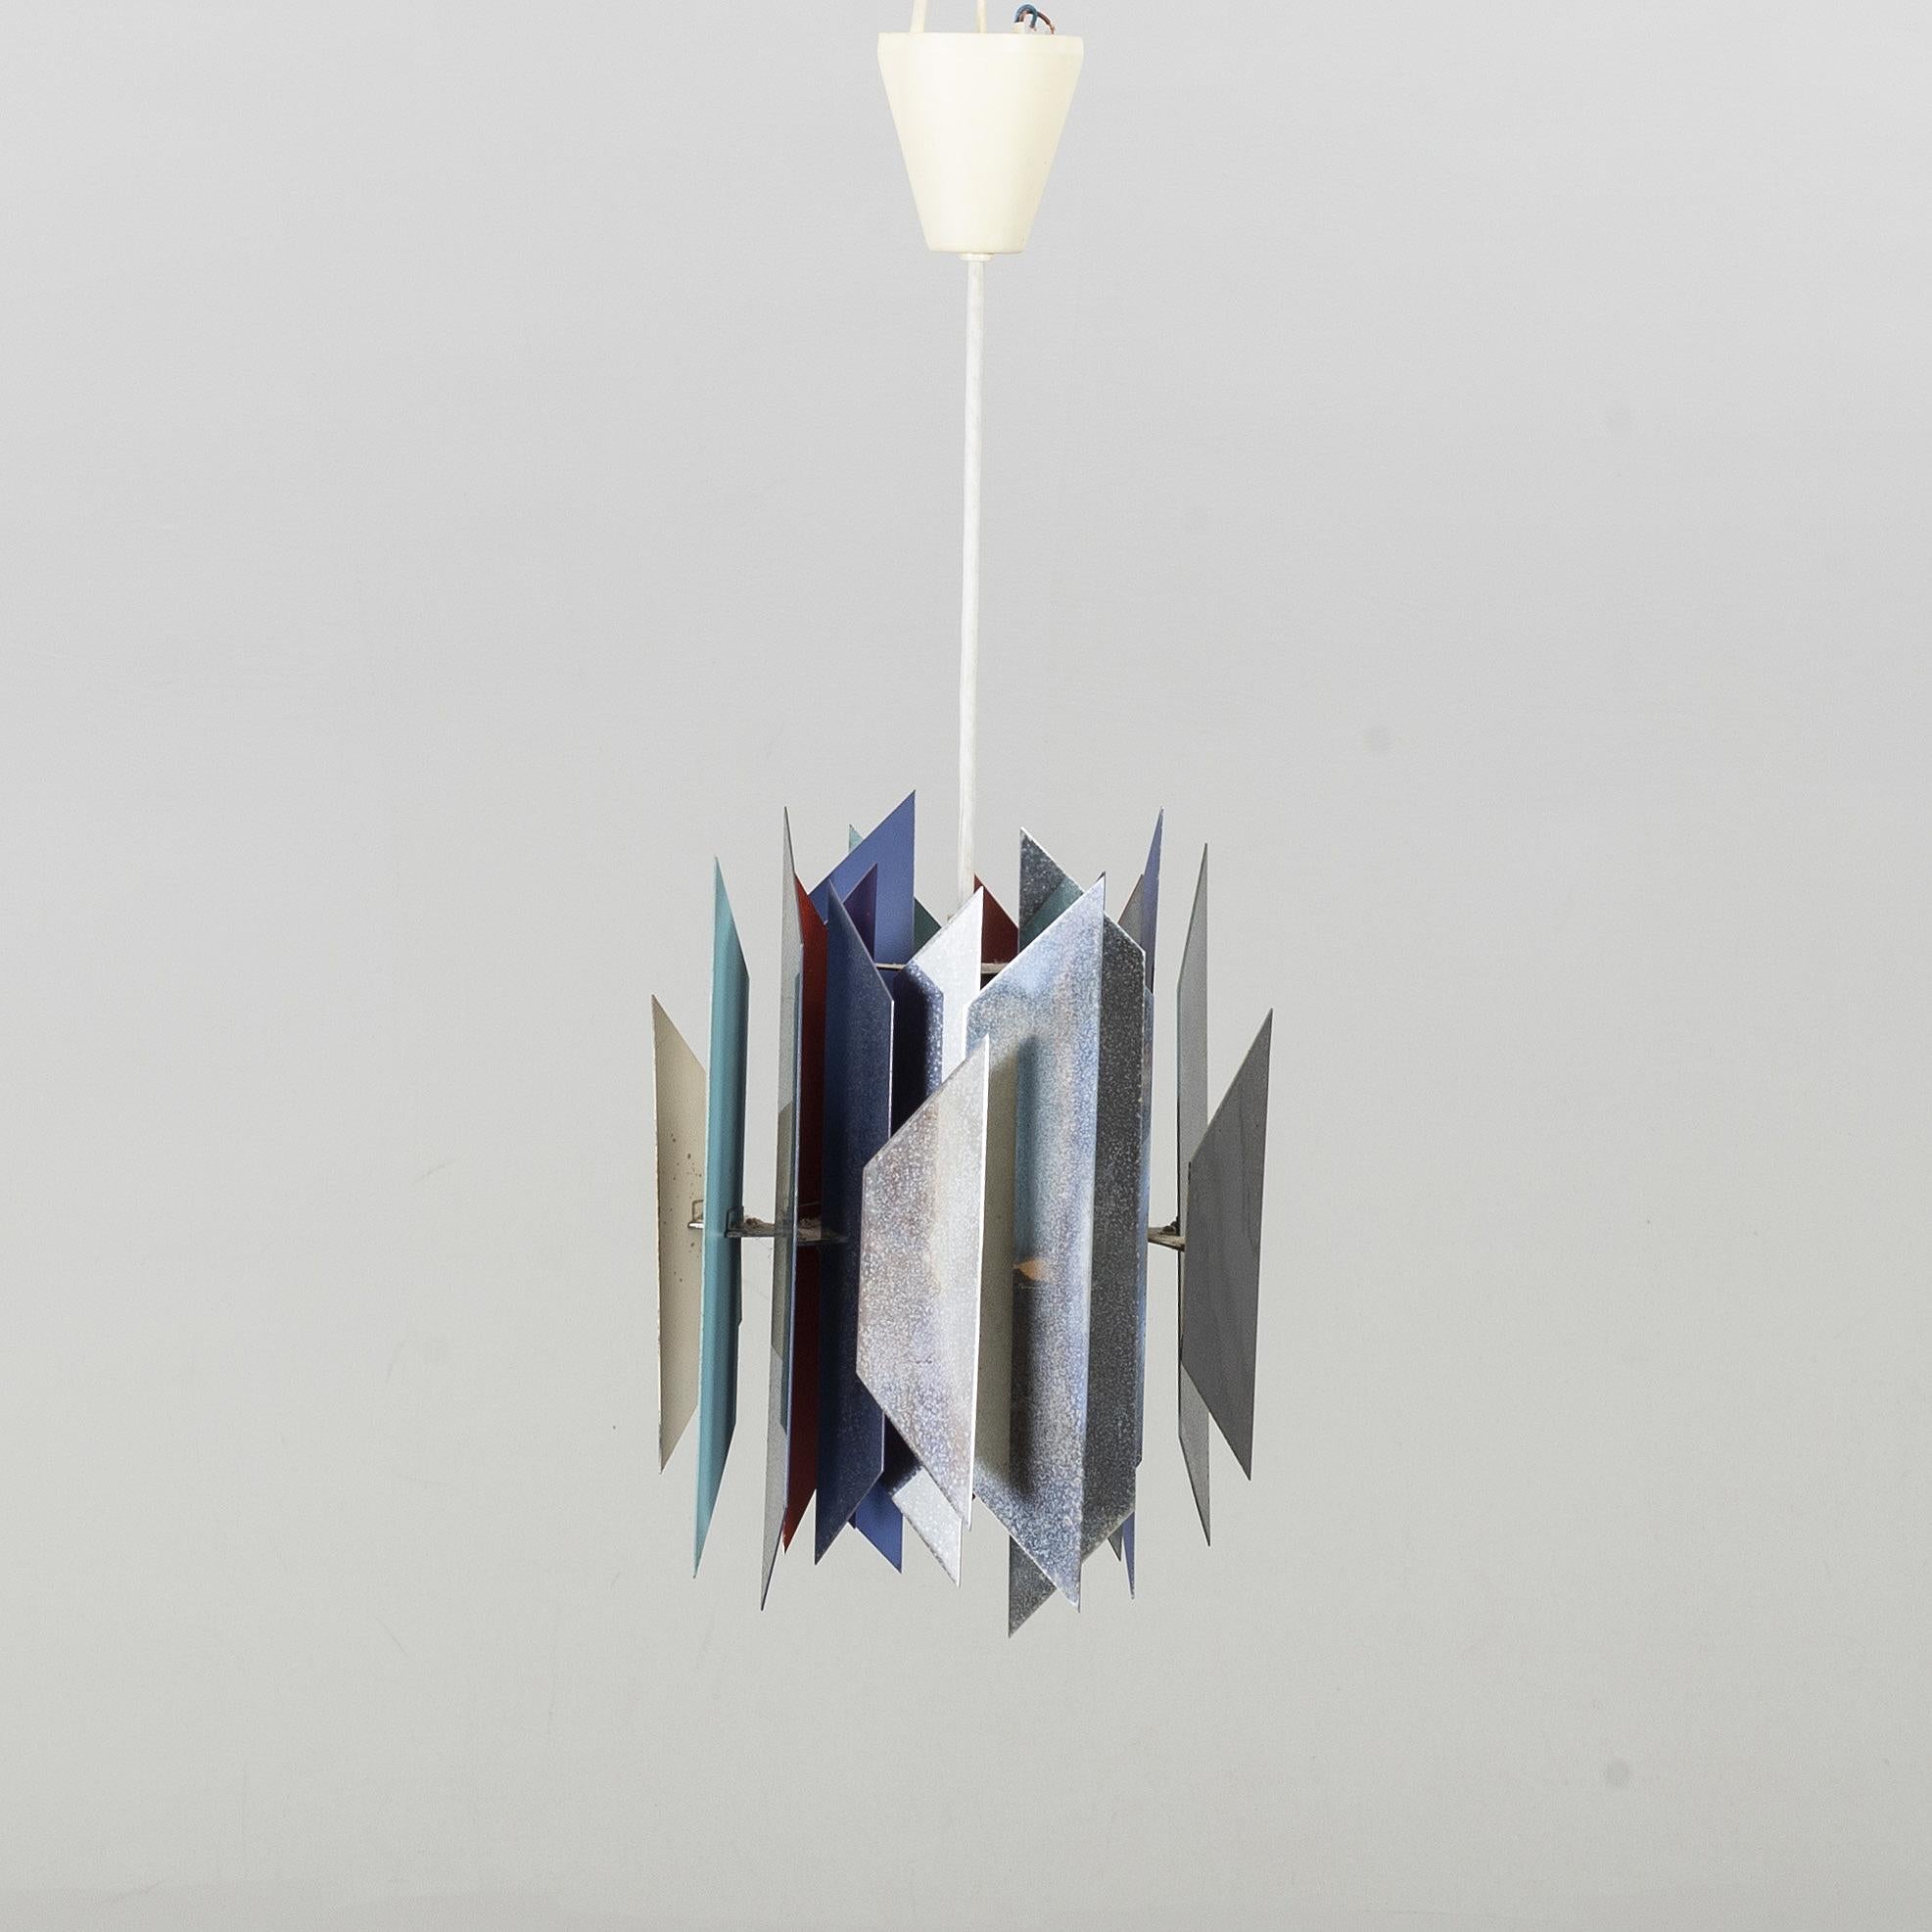 Pendant lamp Tivoli by Simon Henningsen 1970
great due to age, good overall condition.